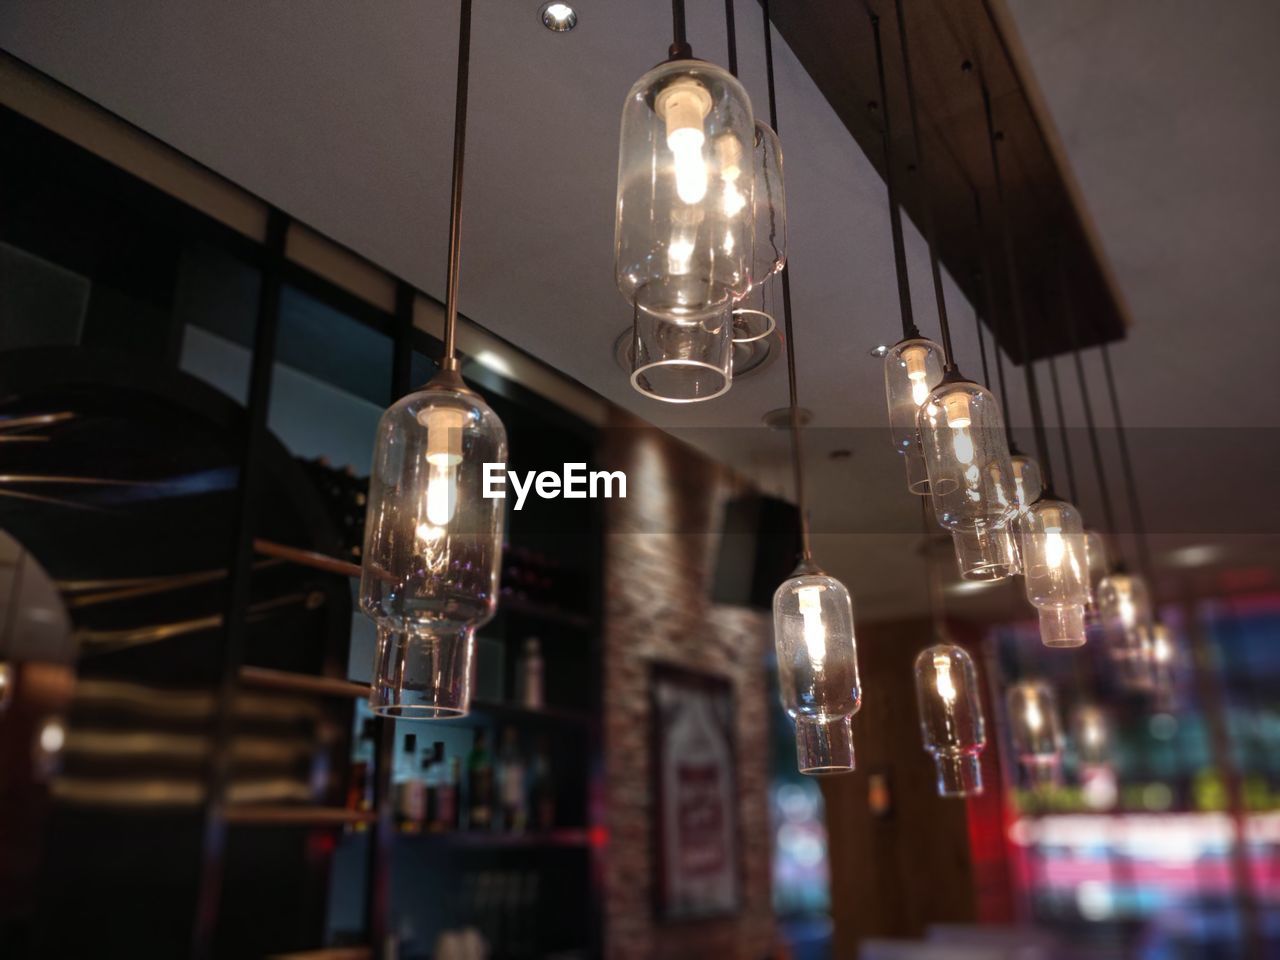 Low angle view of illuminated pendant lights hanging from ceiling in restaurant